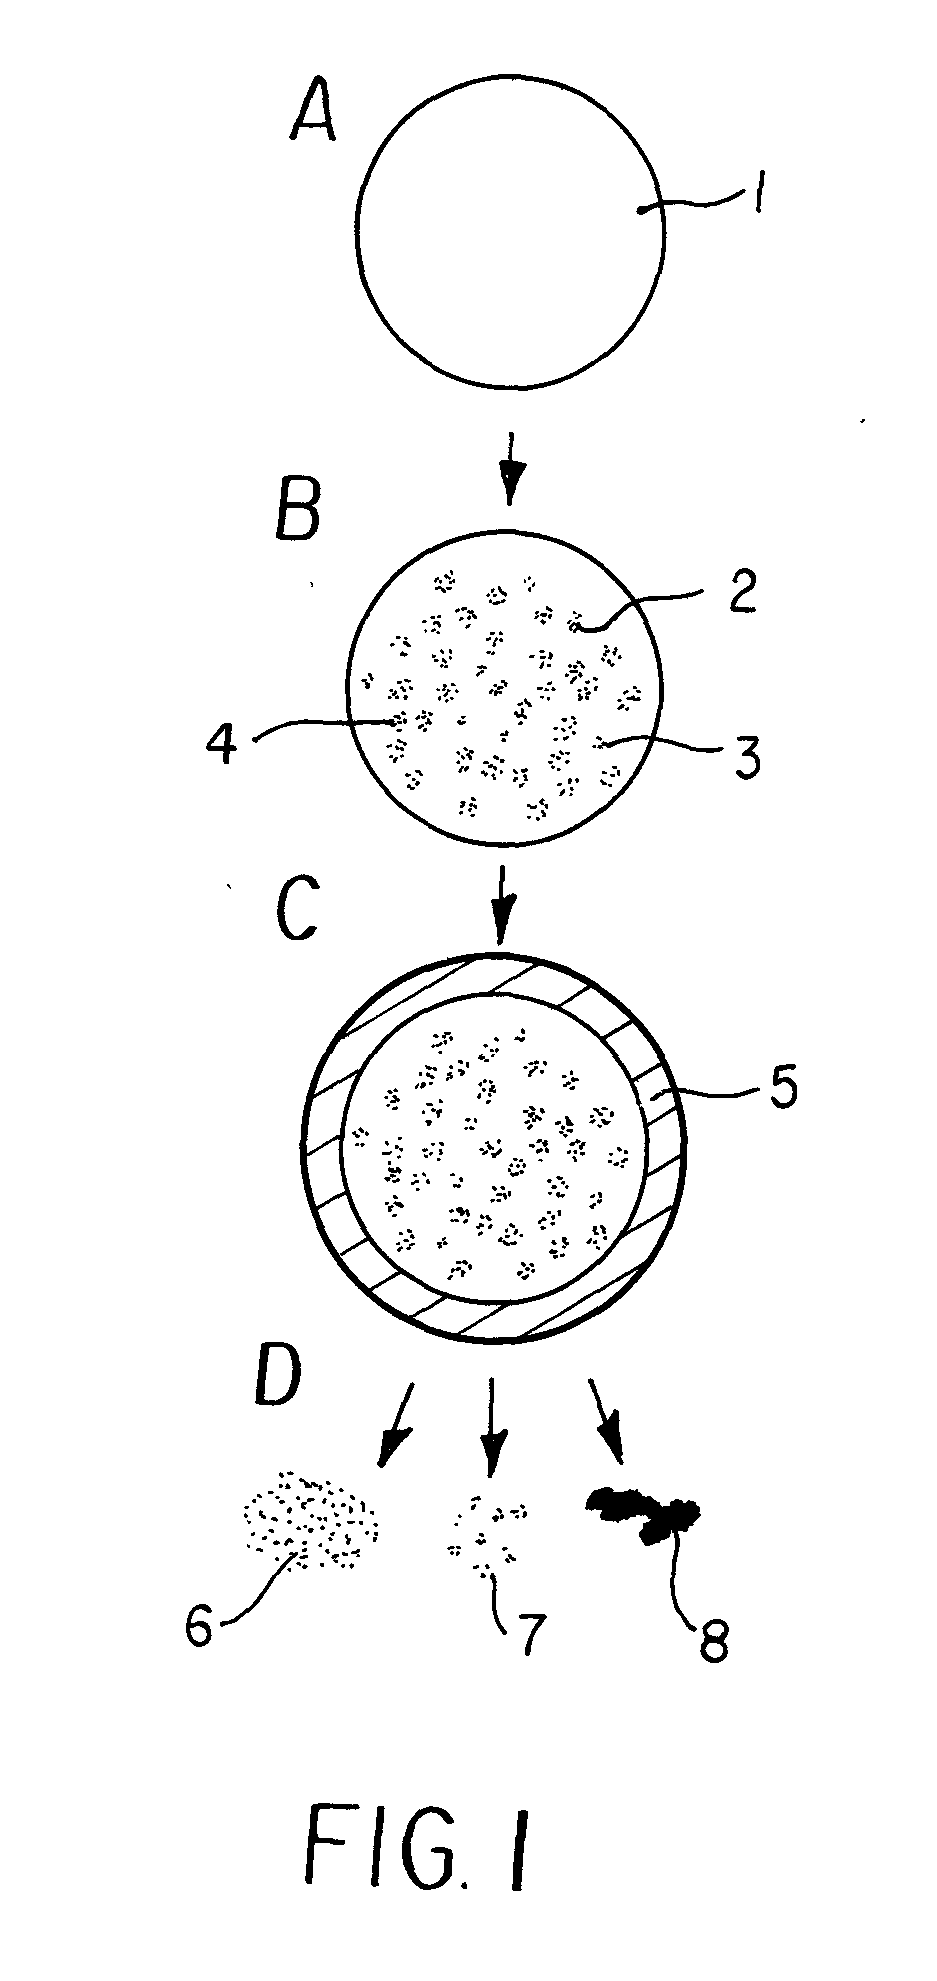 Carbide-derived-carbon-based oxygen carriers